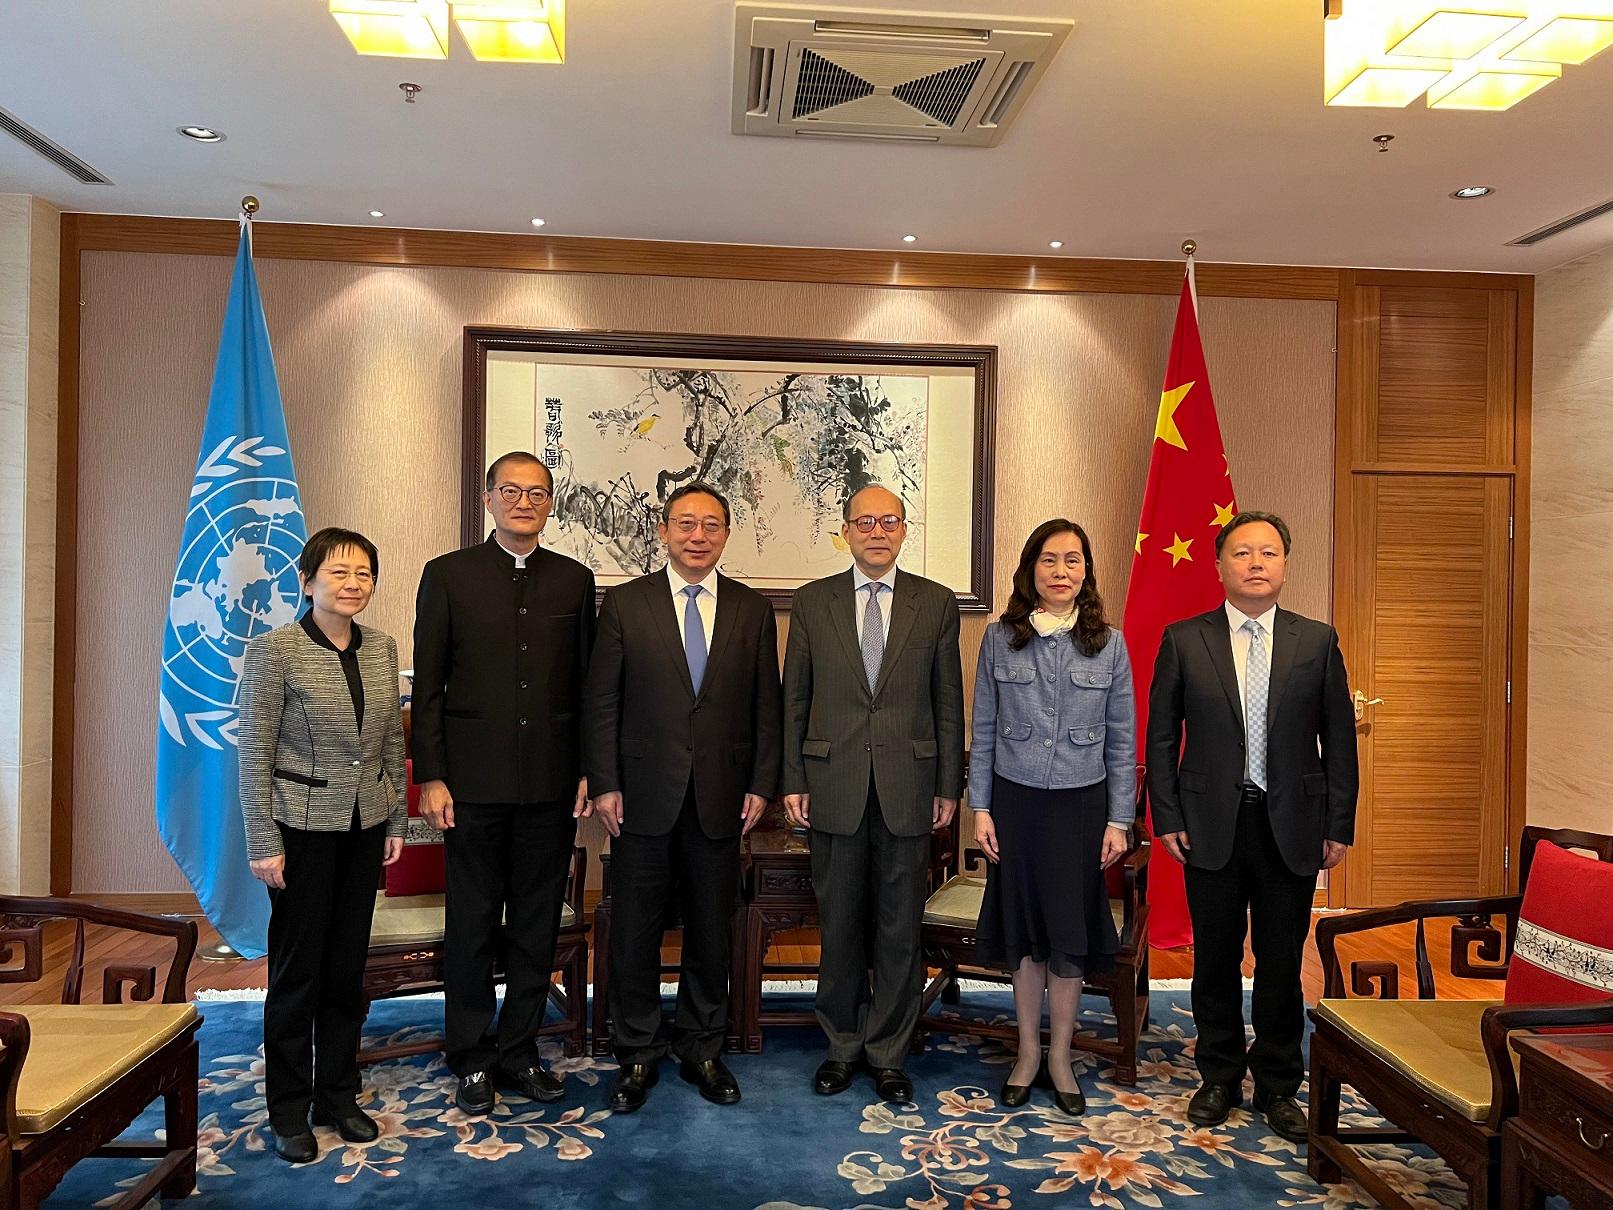 The Secretary for Health, Professor Lo Chung-mau, met with the Vice-minister of the National Health Commission (NHC), Mr Cao Xuetao; the Ambassador Extraordinary and Plenipotentiary, Permanent Representative of the People's Republic of China to the United Nations Office at Geneva and other International Organizations in Switzerland, Mr Chen Xu; and Deputy Head of the National Administration of Disease Prevention and Control Mr Sun Yang in Switzerland today (May 20, Geneva time). Photo shows Professor Lo (second left); Mr Cao (third left); Mr Chen (third right); Mr Sun (first right); the Director General of the Office of Hong Kong, Macao and Taiwan Affairs of the NHC, Ms Zhang Yang (first left); and the Secretary for Social Affairs and Culture of the Macao Special Administrative Region, Ms Ao-Ieong U (second right), in a group photo.